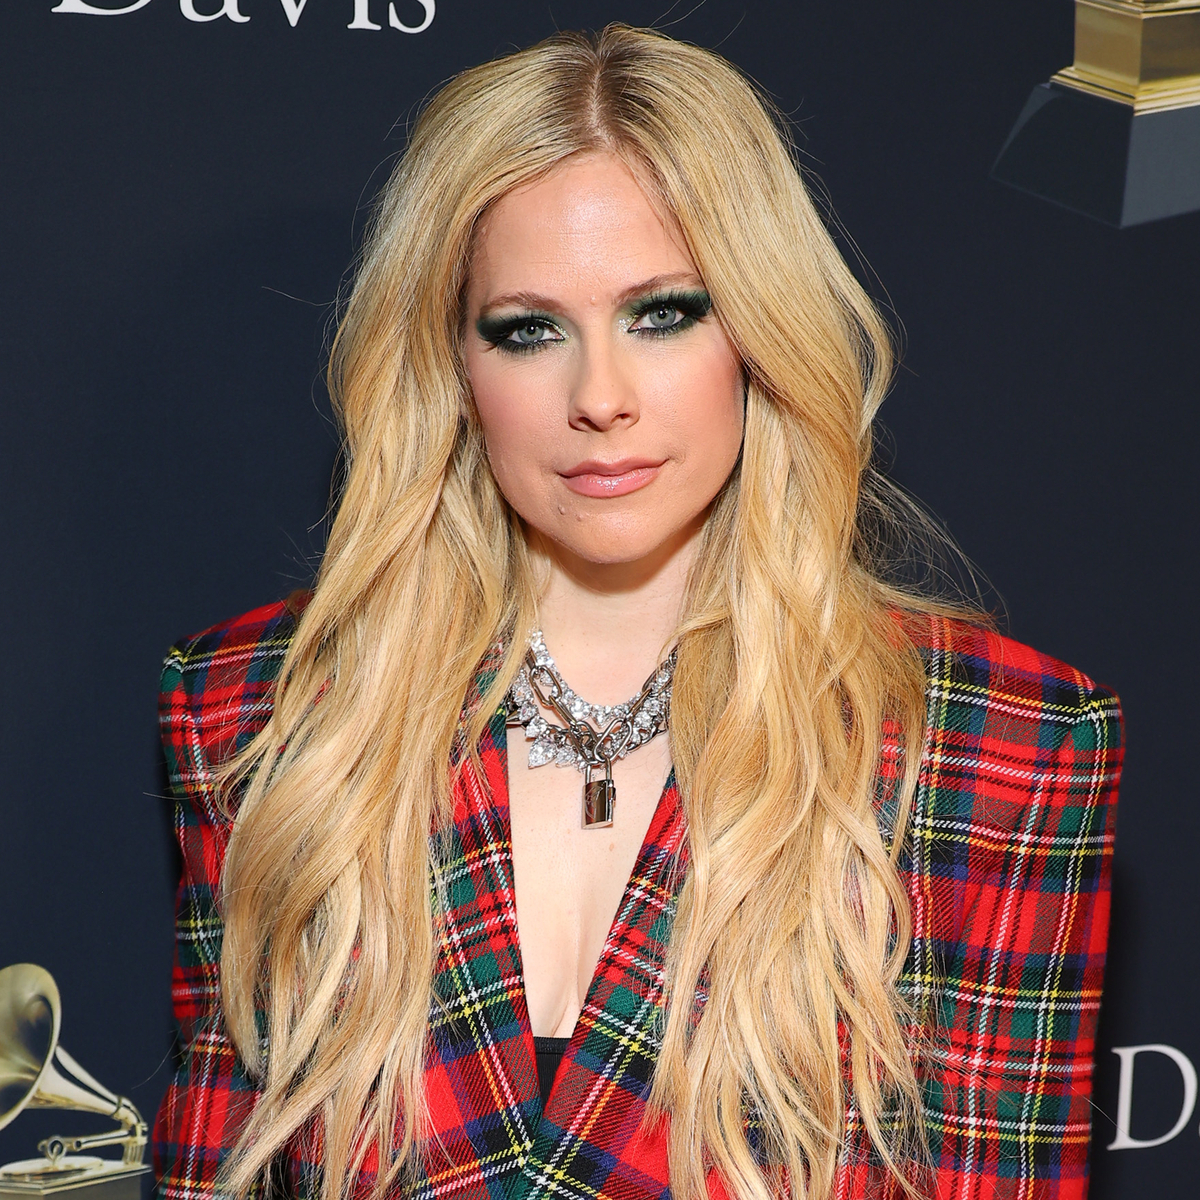 Avril Lavigne Addresses “Dumb” Body Double Conspiracy Theory